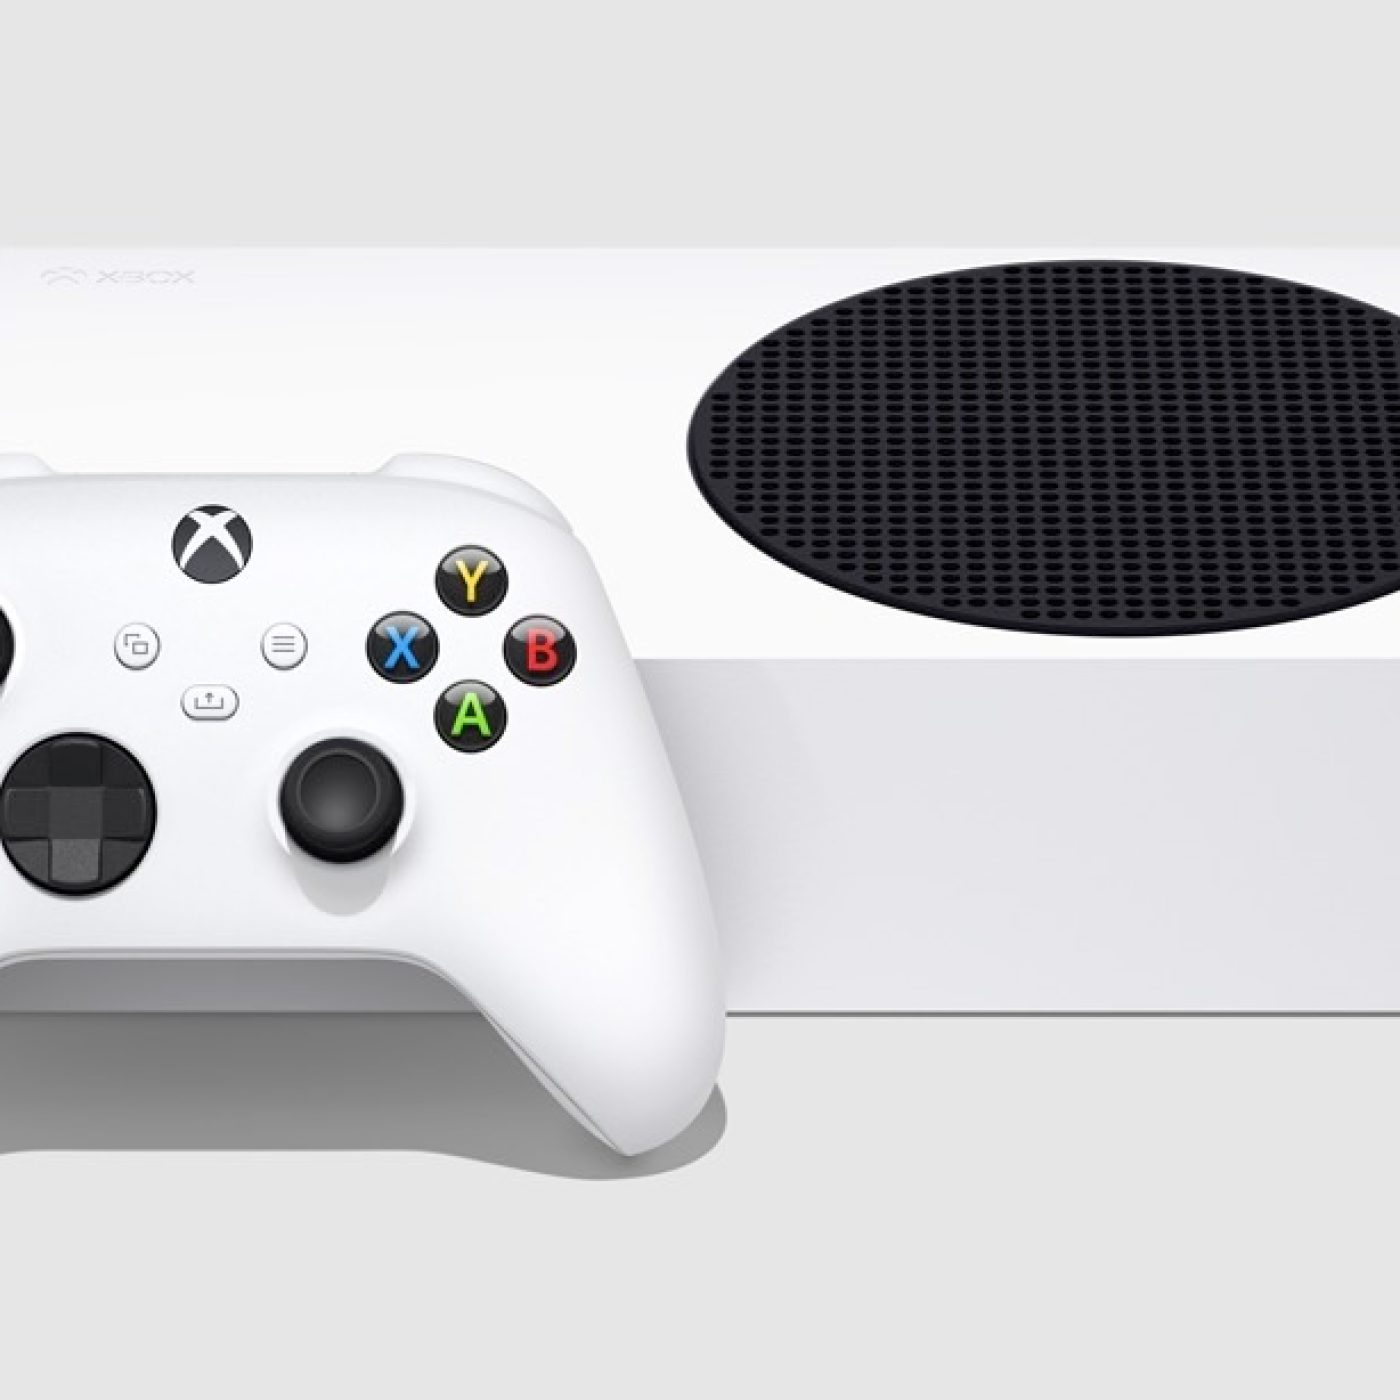 Xbox Series S review: a tempting price tag, but is it too good to be true?